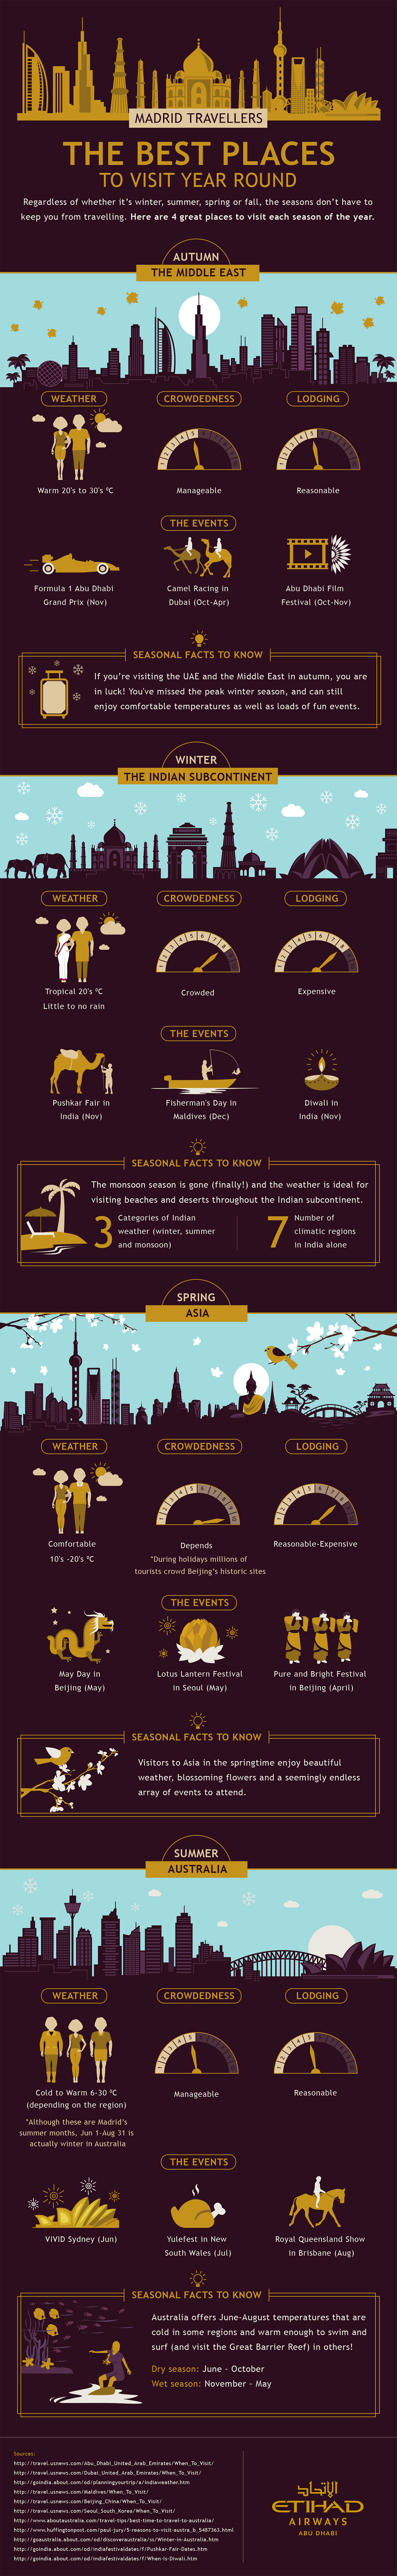 INFOGRAPHIC | MADRID TRAVELLERS – THE BEST PLACES TO VISIT YEAR ROUND